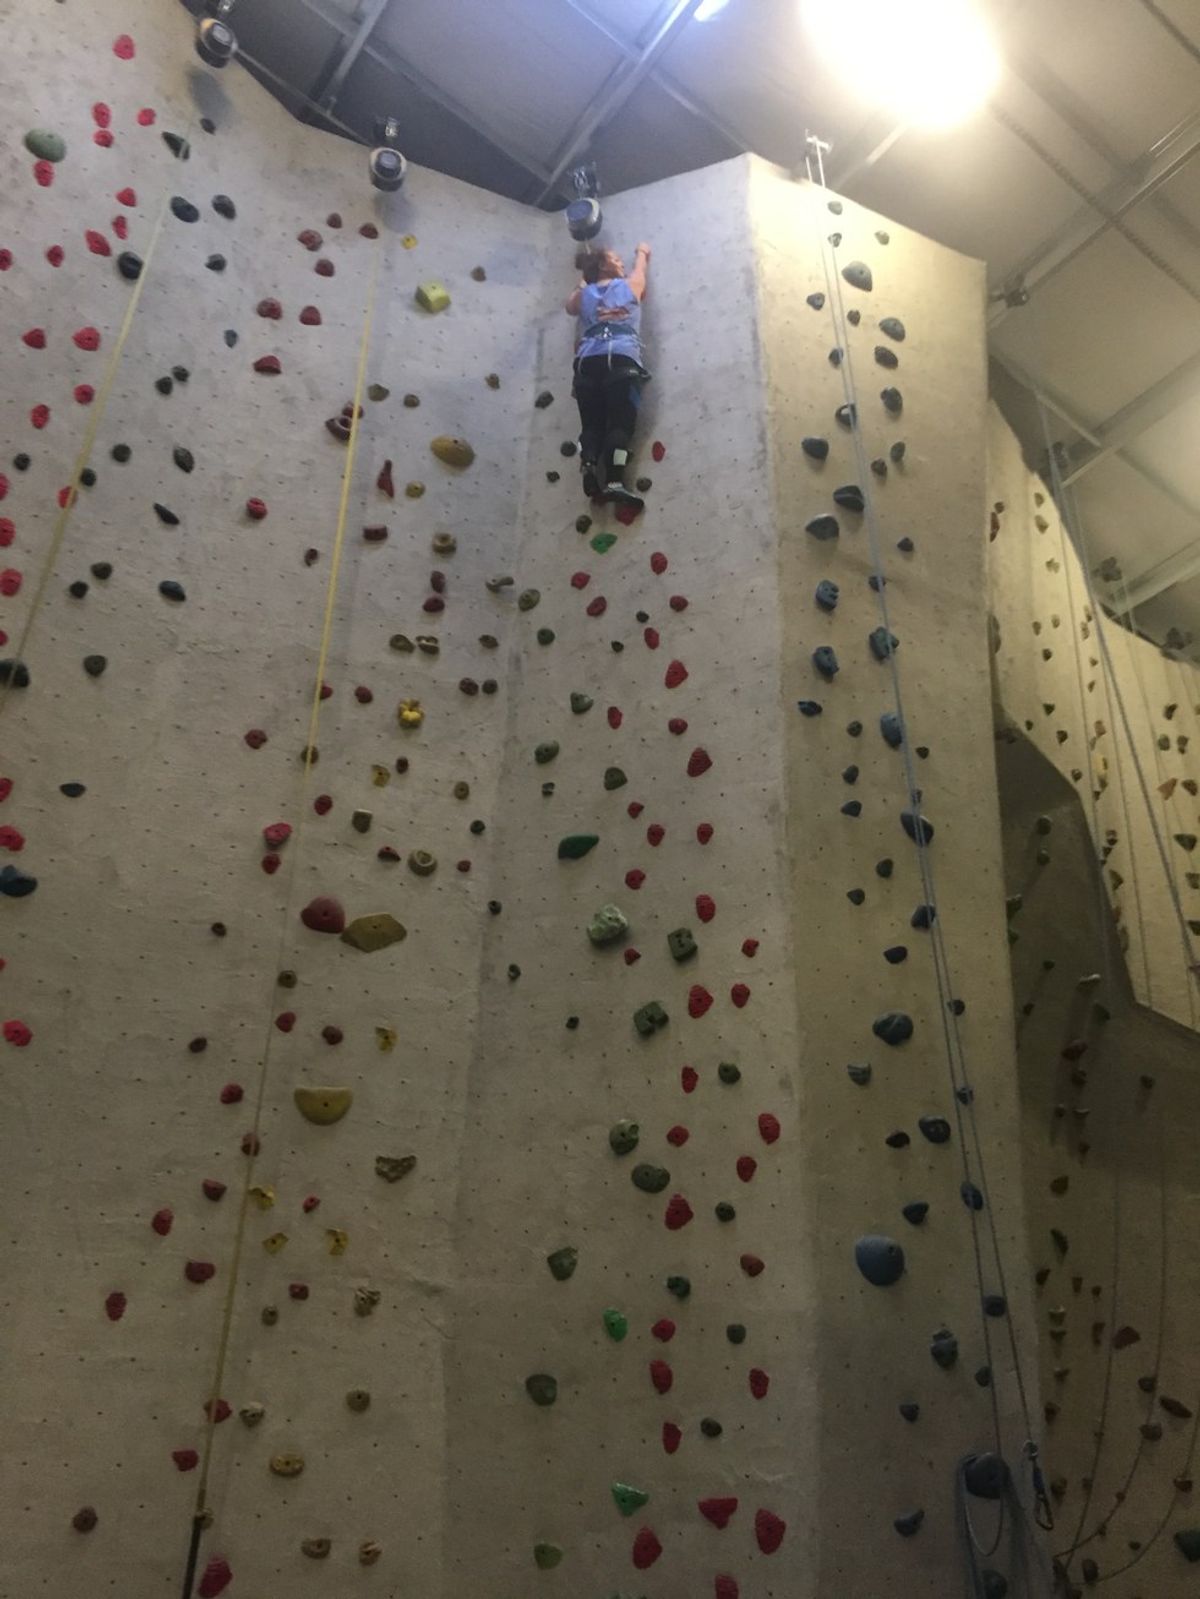 21 Reasons to Start Rock Climbing in Your 20s